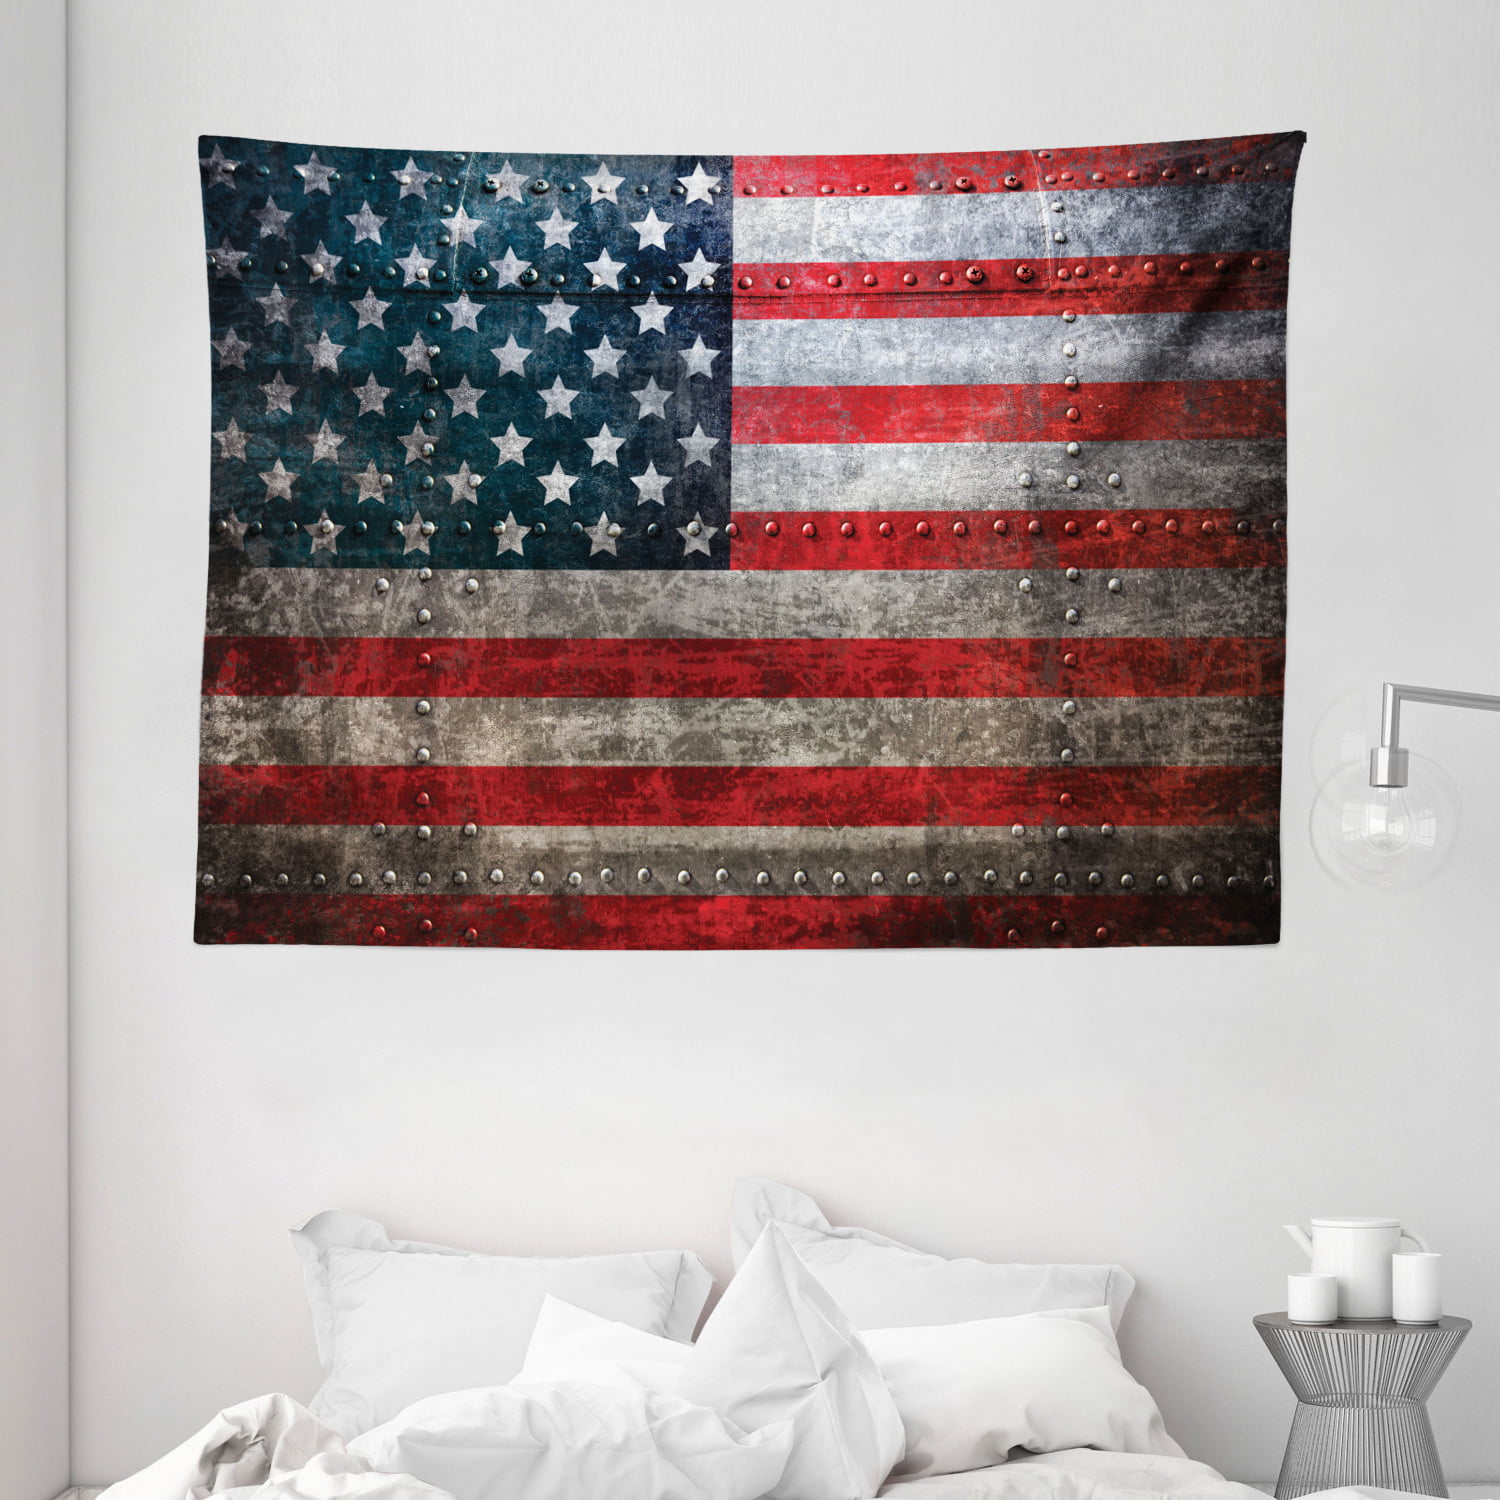 A Washable American Flag Tapestry with Led Light Vintage July 4th Wall Tapestry Retro USA Flag Tapestries Wall Hanging for Independence Day Home Backdrop Study Dorm Decor 